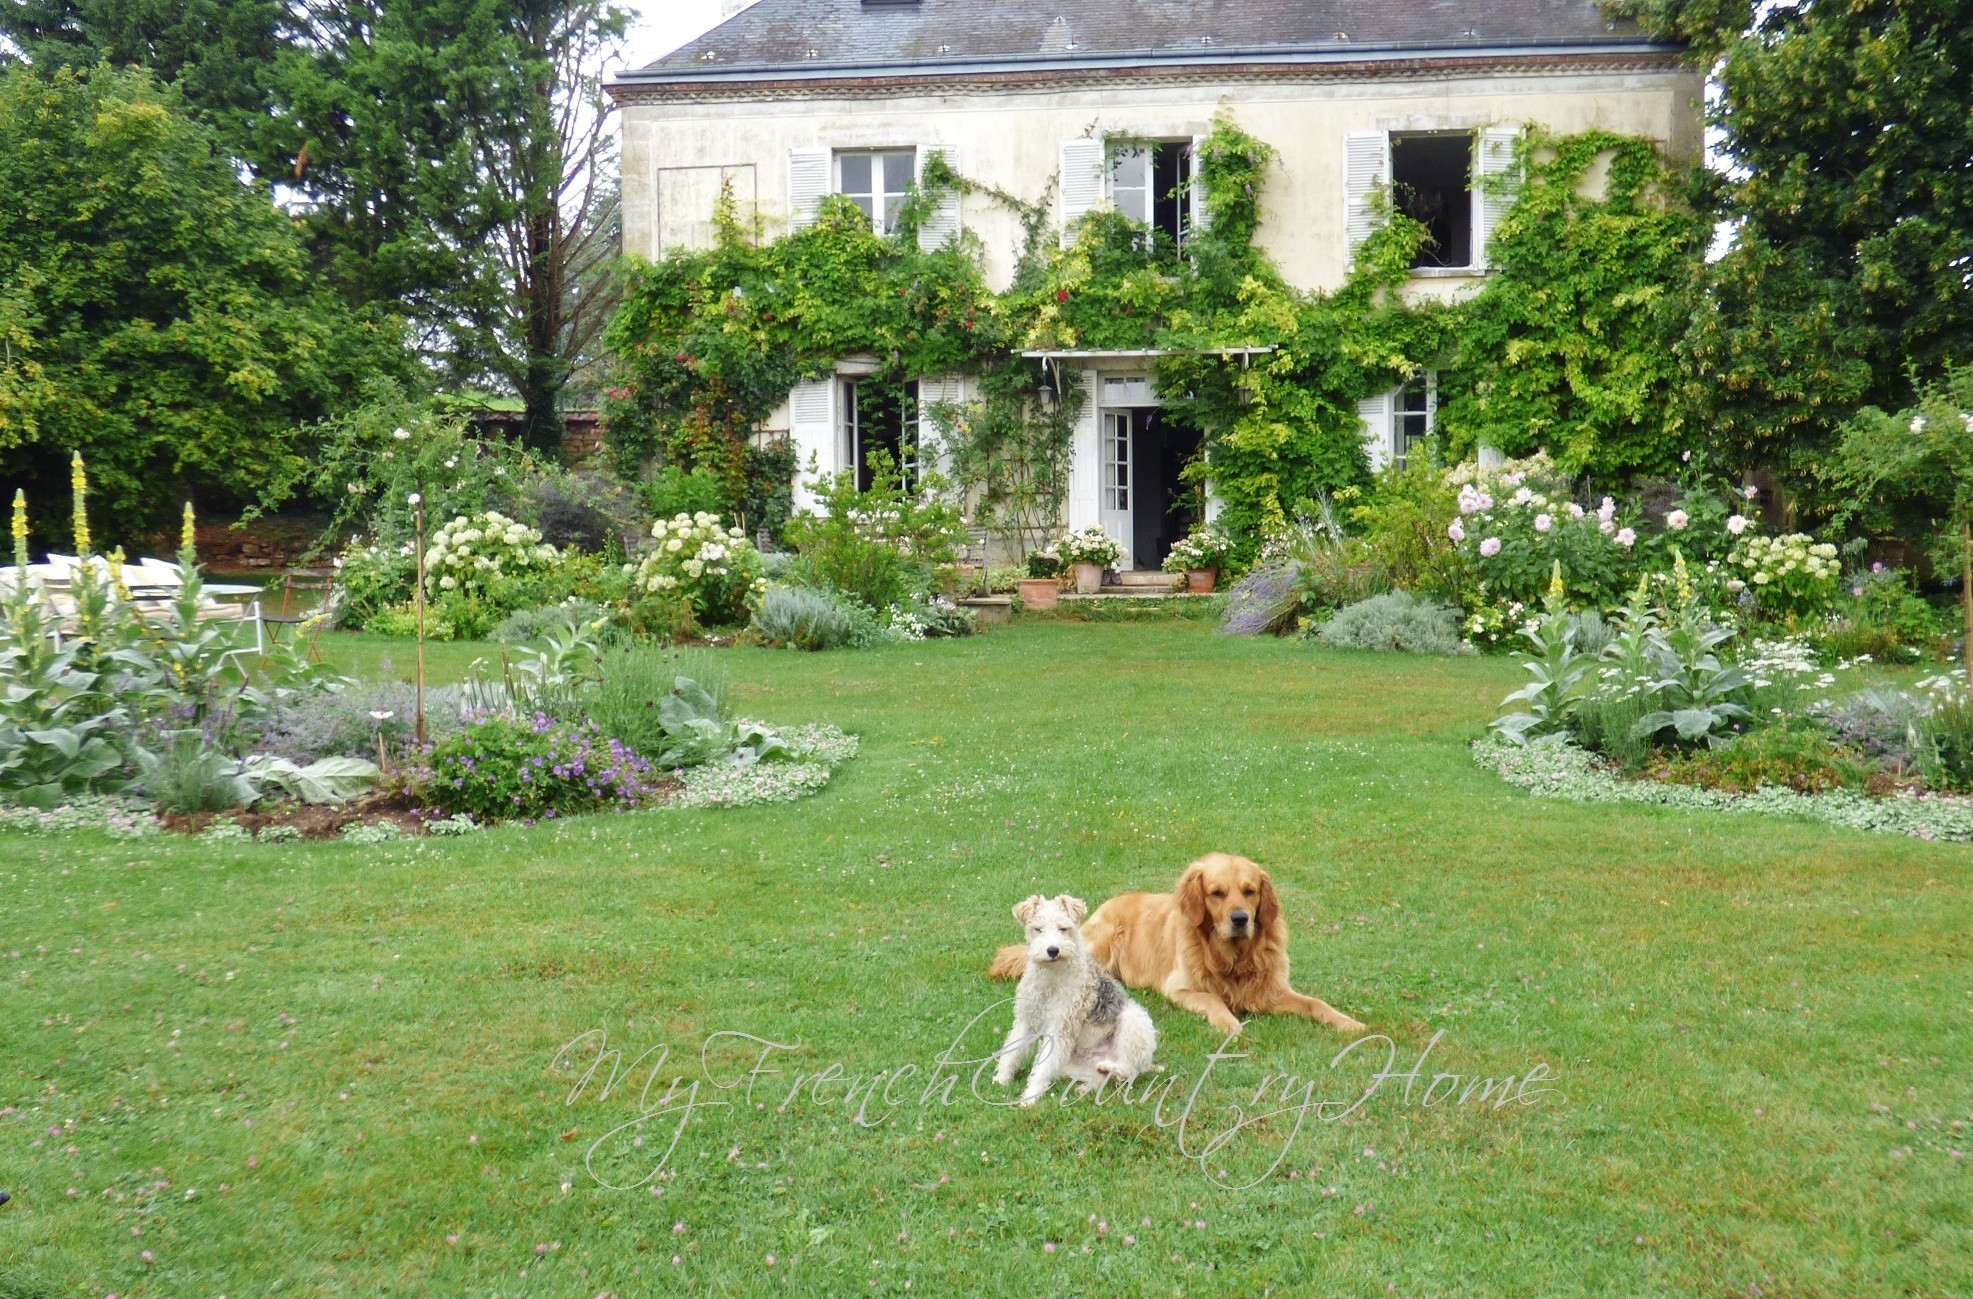 parterres-update-my-french-country-home